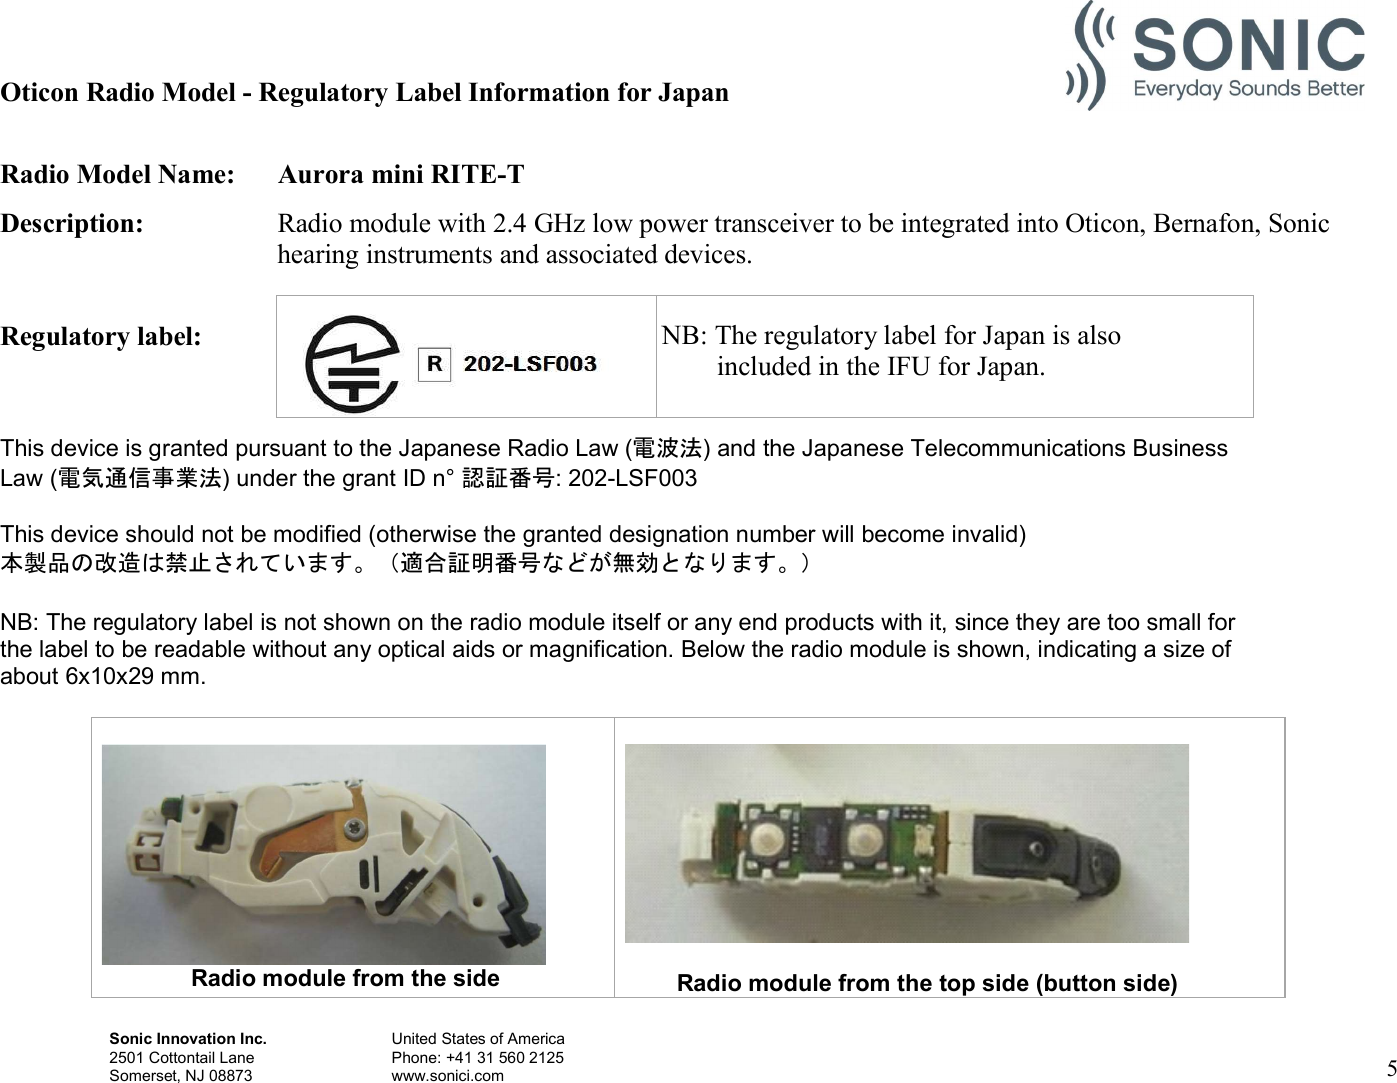 Sonic Innovation Inc.  United States of America 2501 Cottontail Lane    Phone: +41 31 560 2125 Somerset, NJ 08873    www.sonici.com  5   Oticon Radio Model - Regulatory Label Information for Japan  Radio Model Name:  Aurora mini RITE-T Description:  Radio module with 2.4 GHz low power transceiver to be integrated into Oticon, Bernafon, Sonic hearing instruments and associated devices.  Regulatory label:    This device is granted pursuant to the Japanese Radio Law (電波法) and the Japanese Telecommunications Business Law (電気通信事業法) under the grant ID n° 認証番号: 202-LSF003  This device should not be modified (otherwise the granted designation number will become invalid) 本製品の改造は禁止されています。（適合証明番号などが無効となります。）  NB: The regulatory label is not shown on the radio module itself or any end products with it, since they are too small for the label to be readable without any optical aids or magnification. Below the radio module is shown, indicating a size of about 6x10x29 mm.                          Radio module from the side   Radio module from the top side (button side)    NB: The regulatory label for Japan is also         included in the IFU for Japan. 